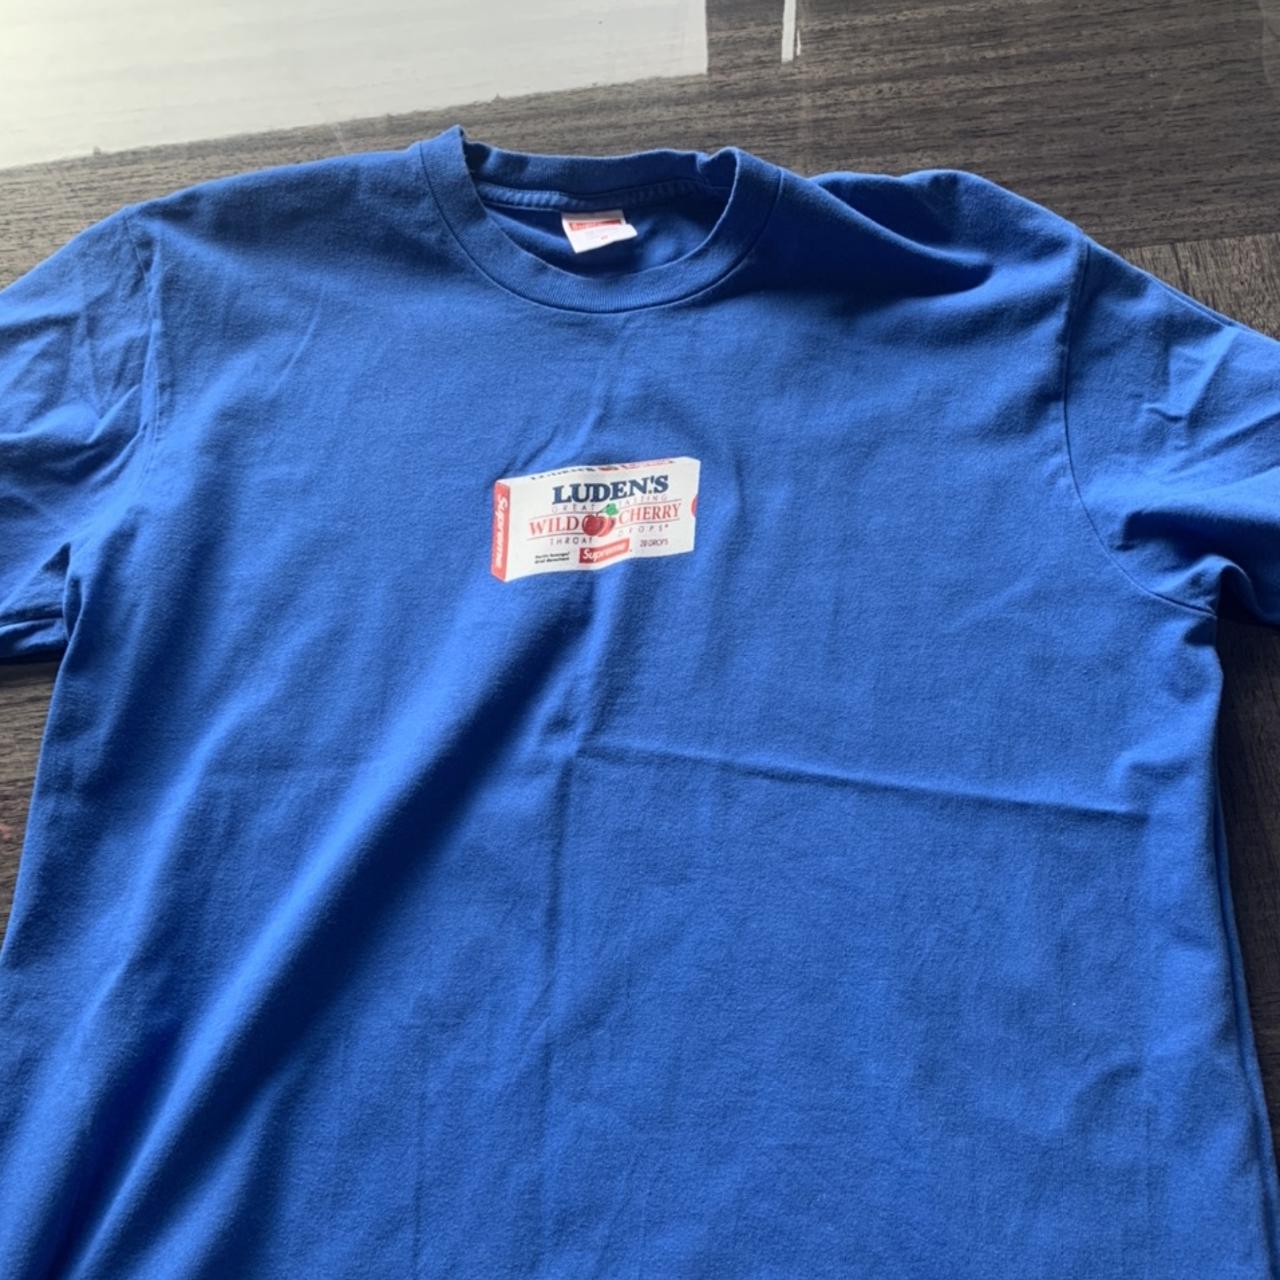 Supreme Ludens t shirt 9/10 condition tts similar to...